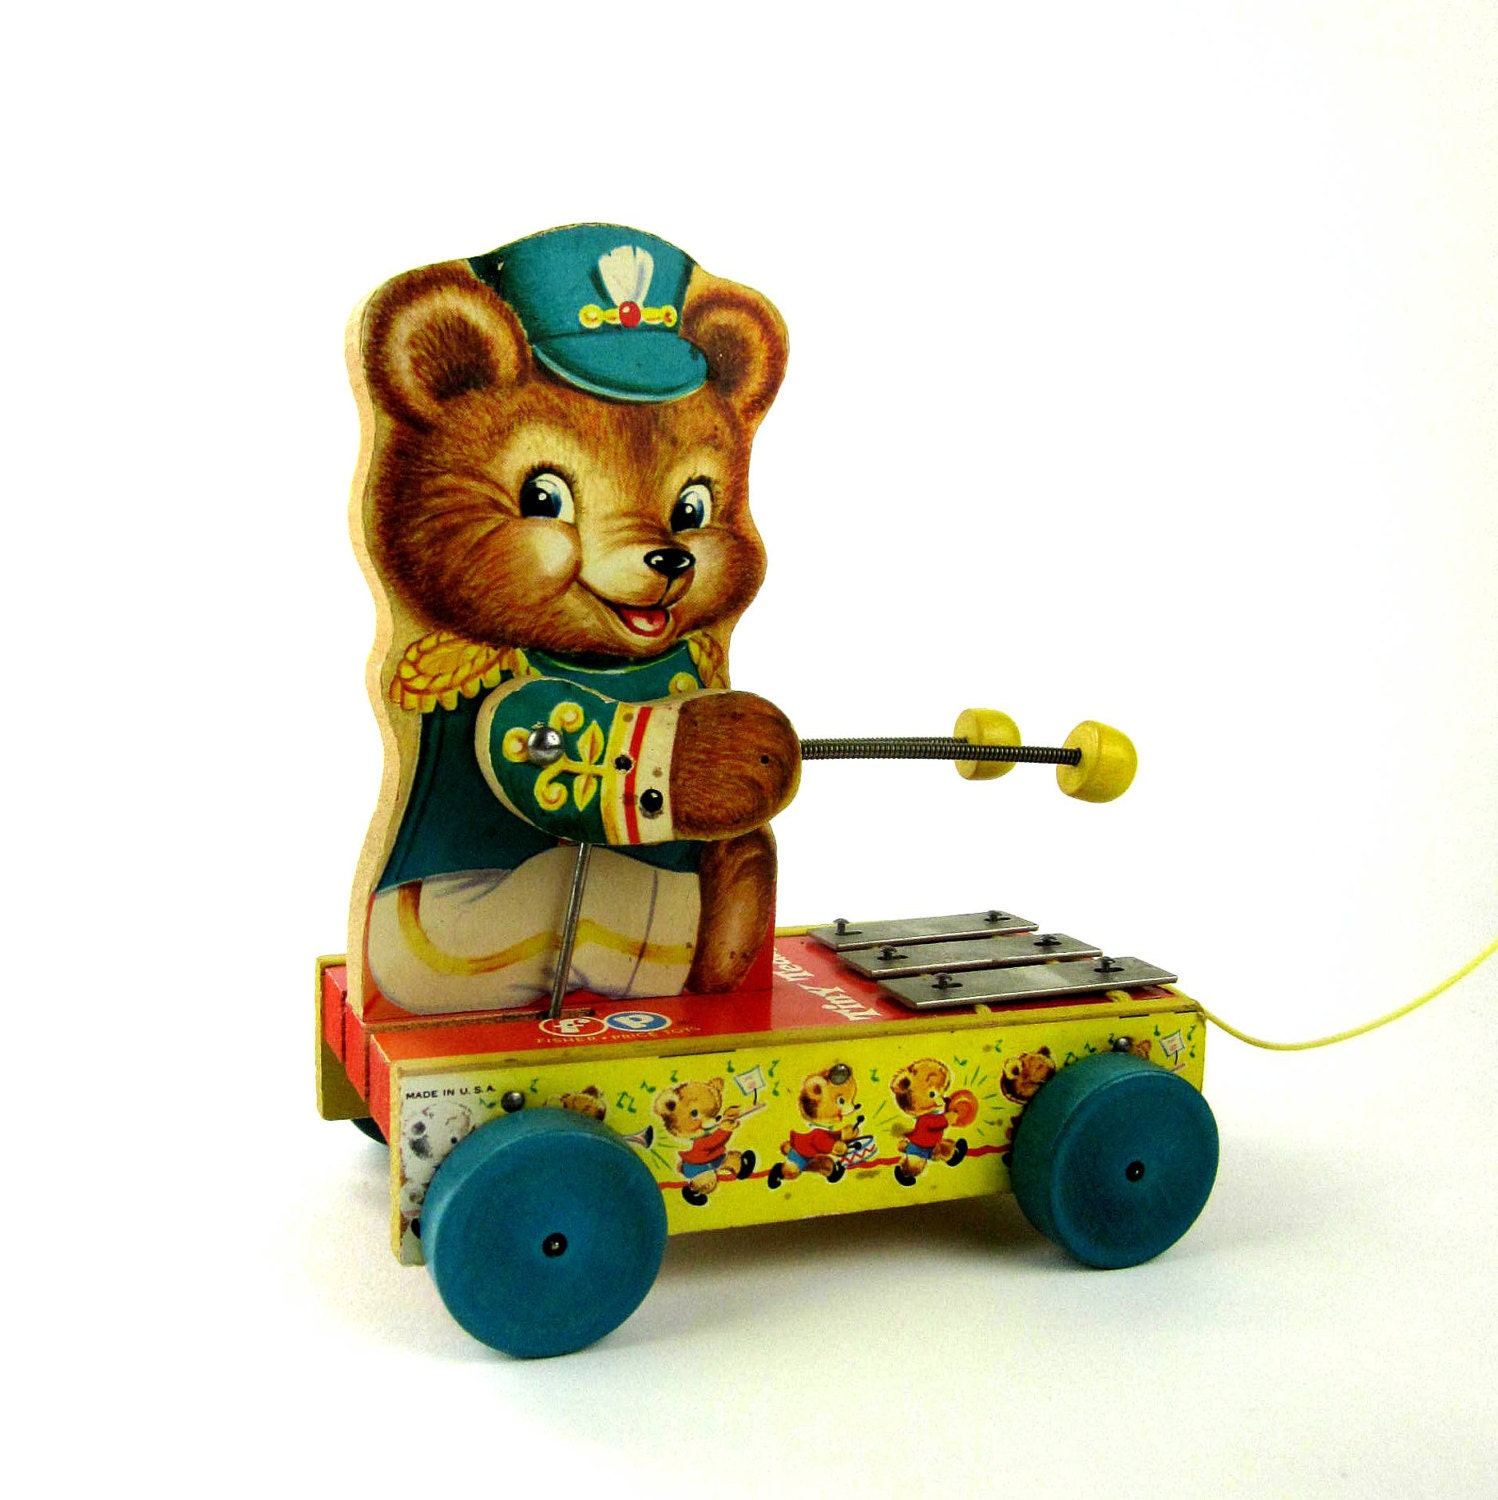 Fisher Price Tiny Teddy Chime Pull Toy 1962 / Excellent Condition - AttysSproutVintage